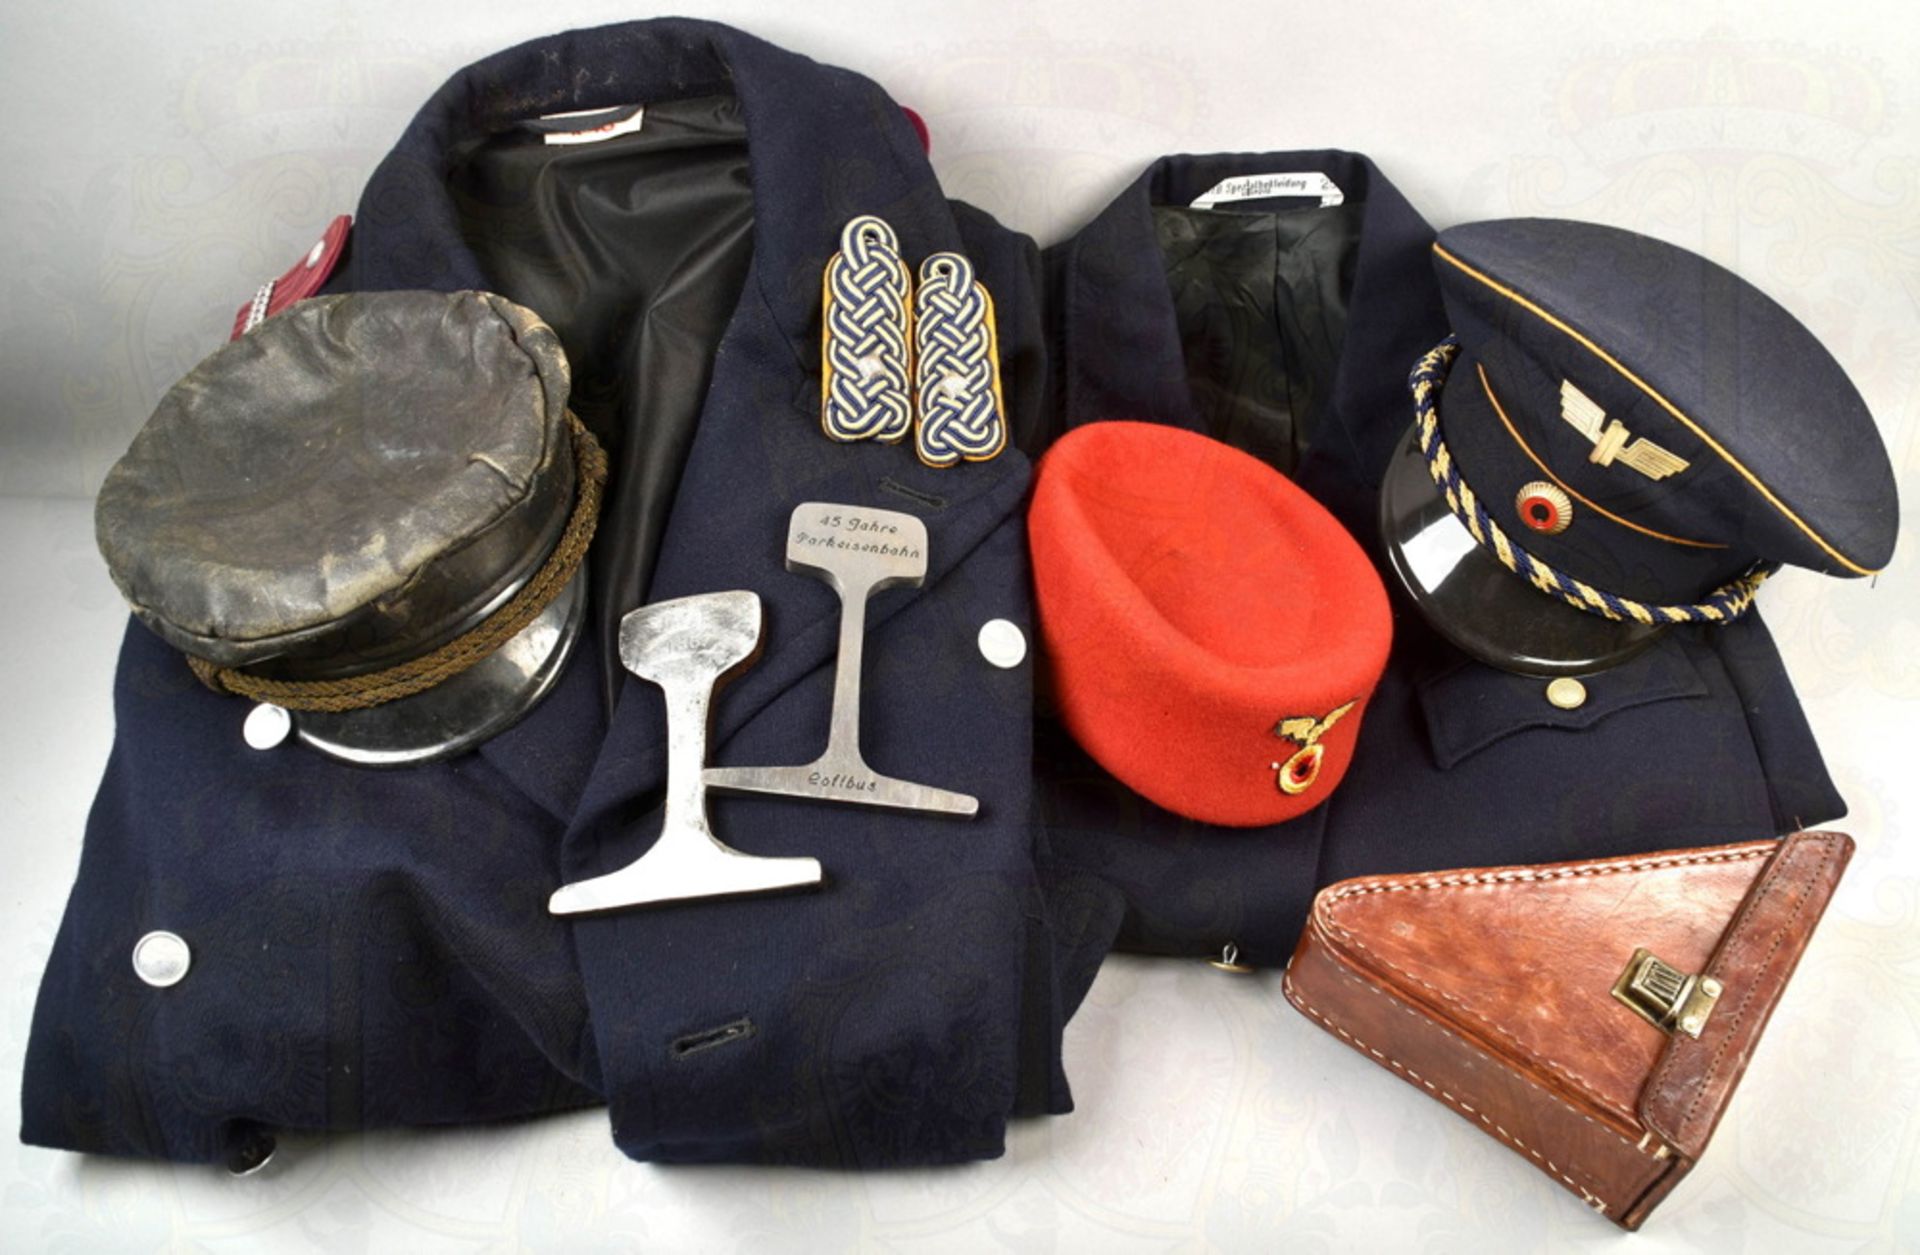 Grouping of GDR uniform parts